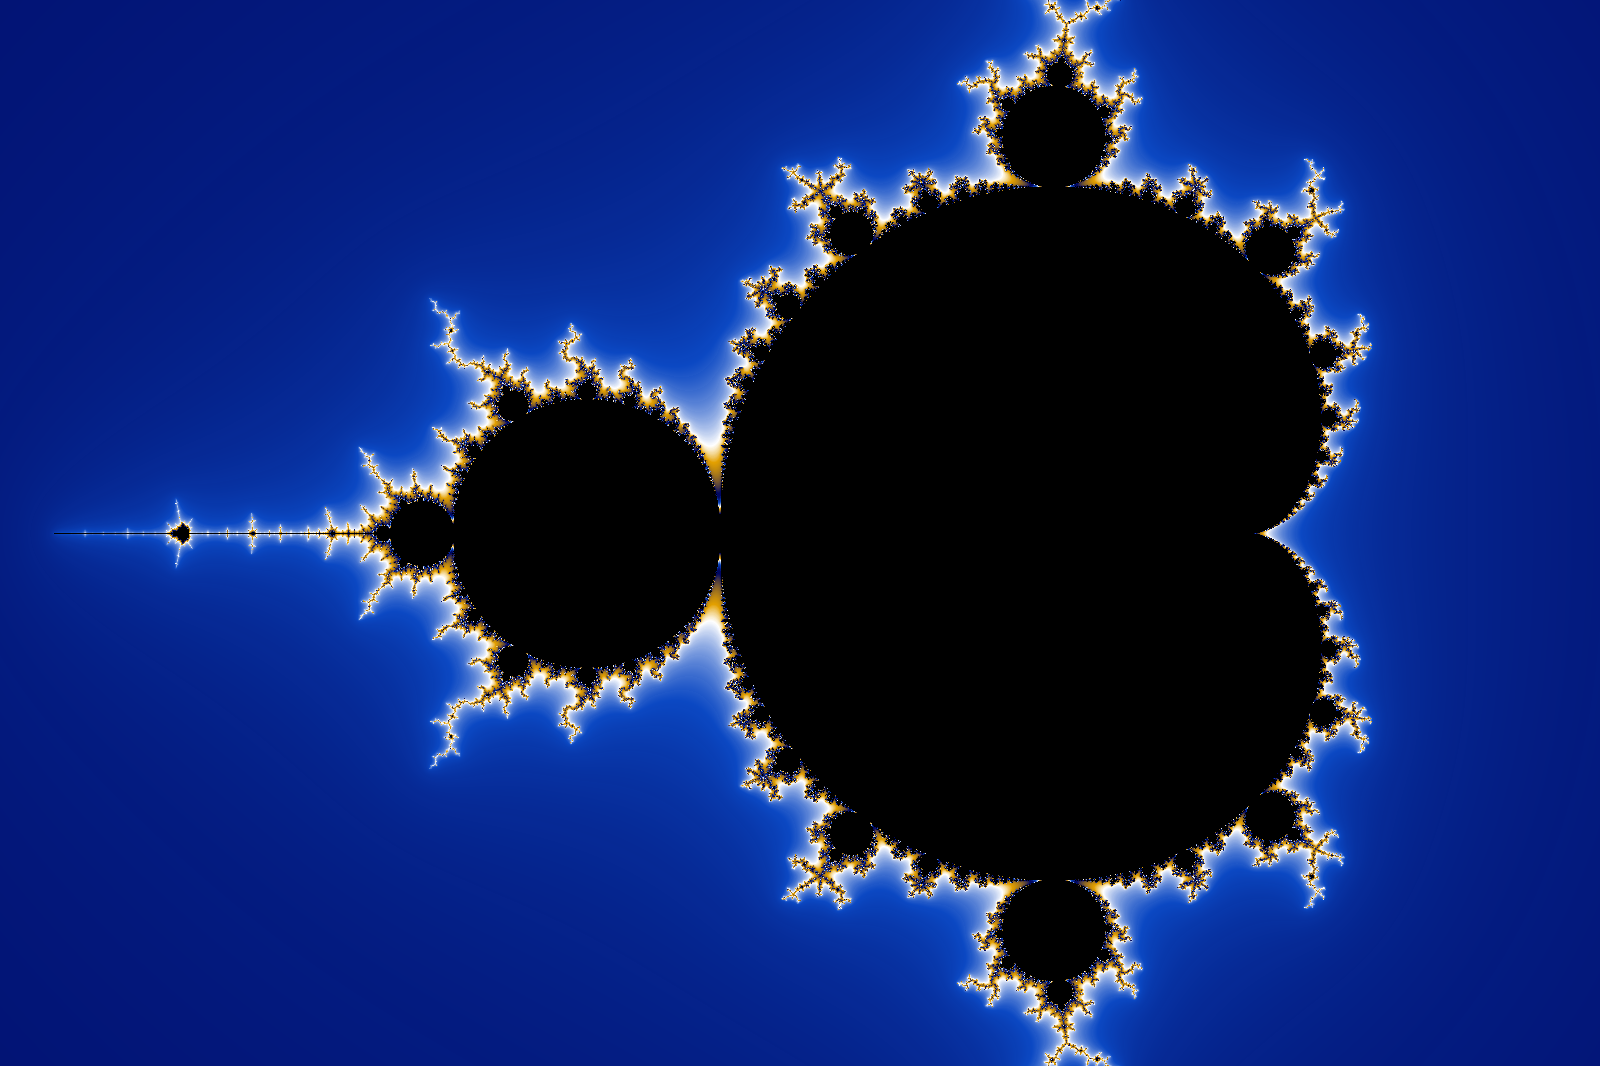 example fractal image 2